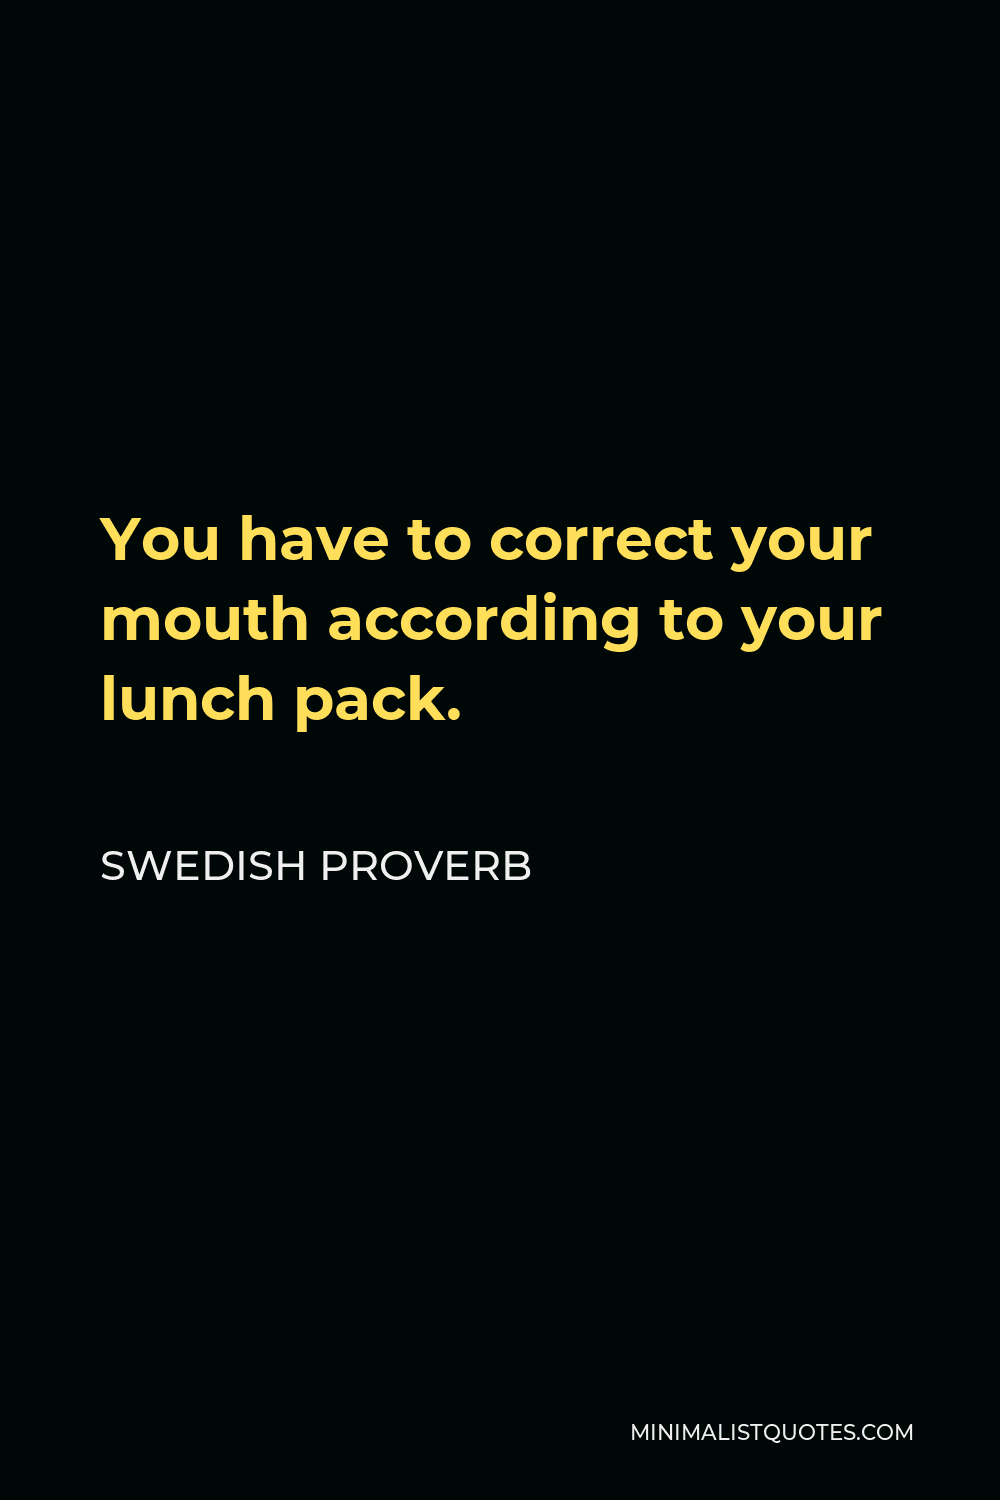 Swedish Proverb Quote - You have to correct your mouth according to your lunch pack.